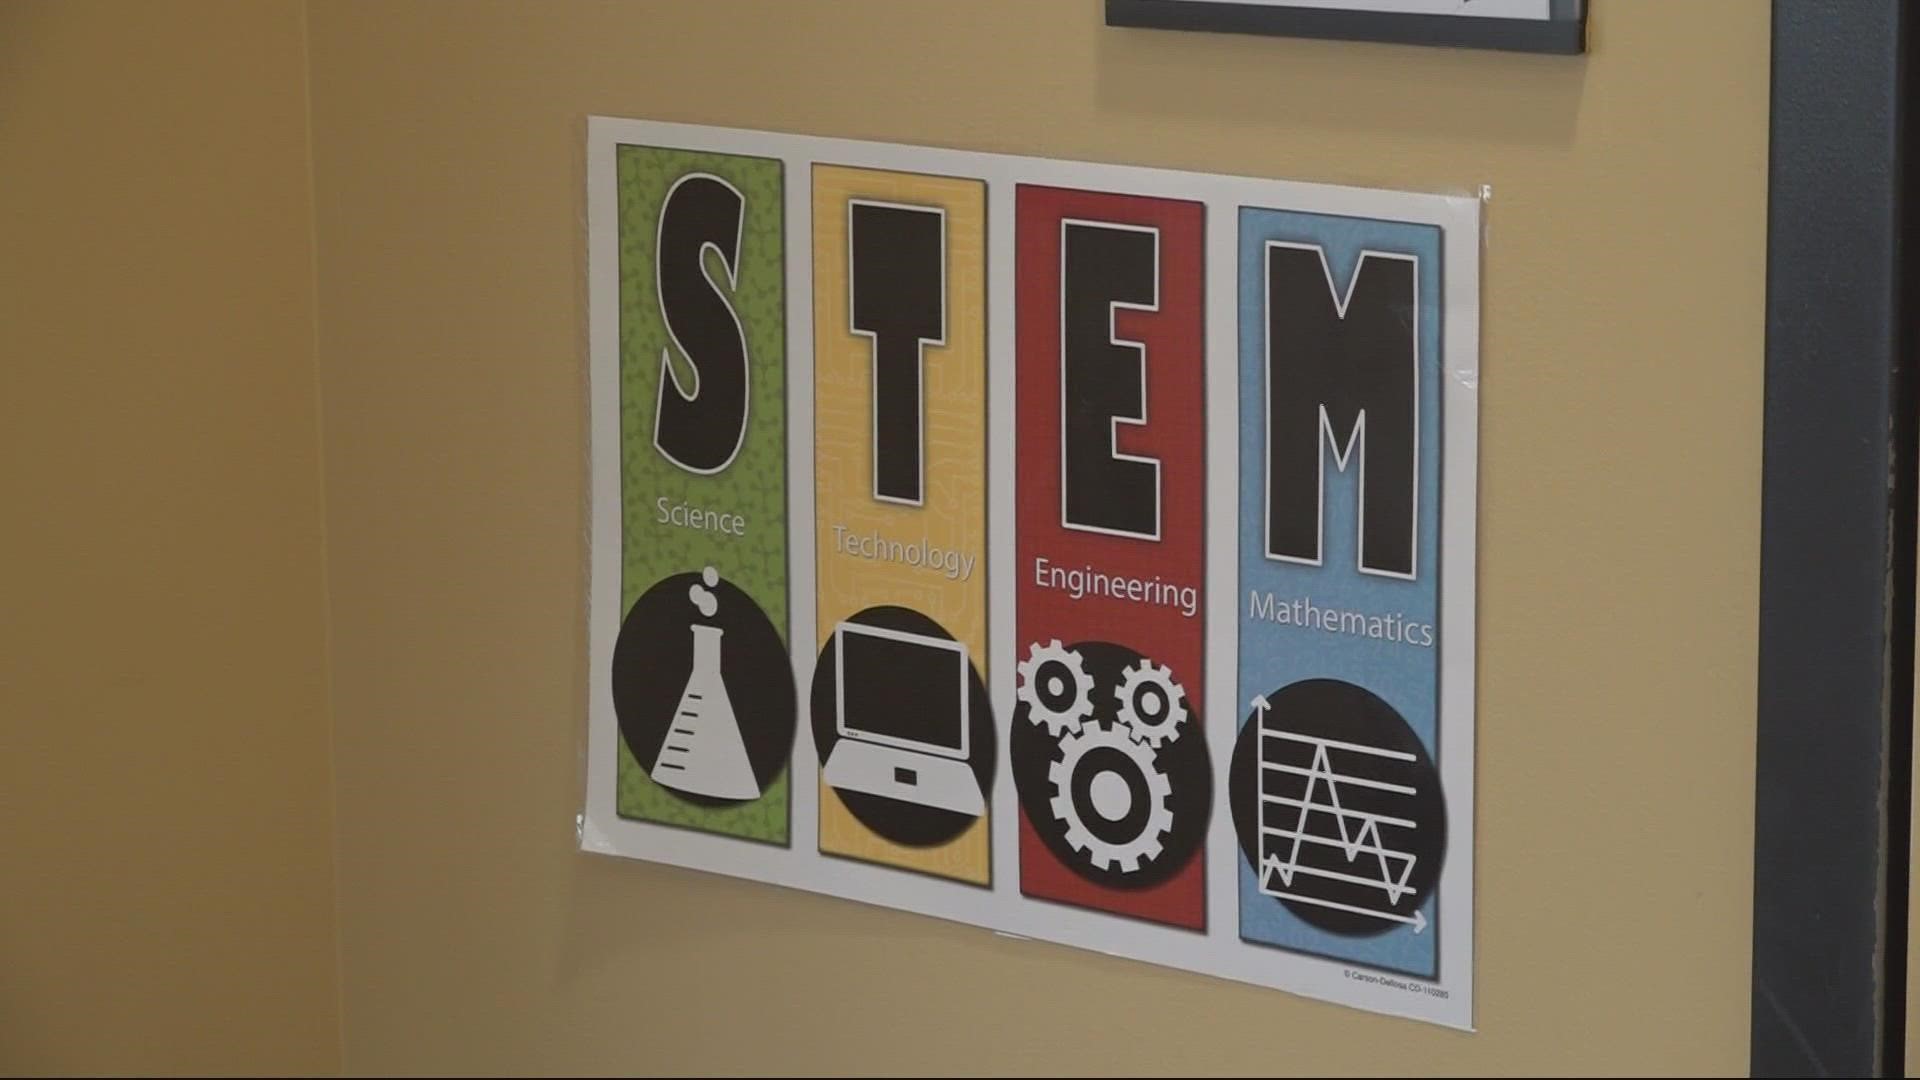 Women spoke to the school on behalf of companies like Google, Nike, Intel and the Army Corps of Engineers. KGW's Bryant Clerkley reports.